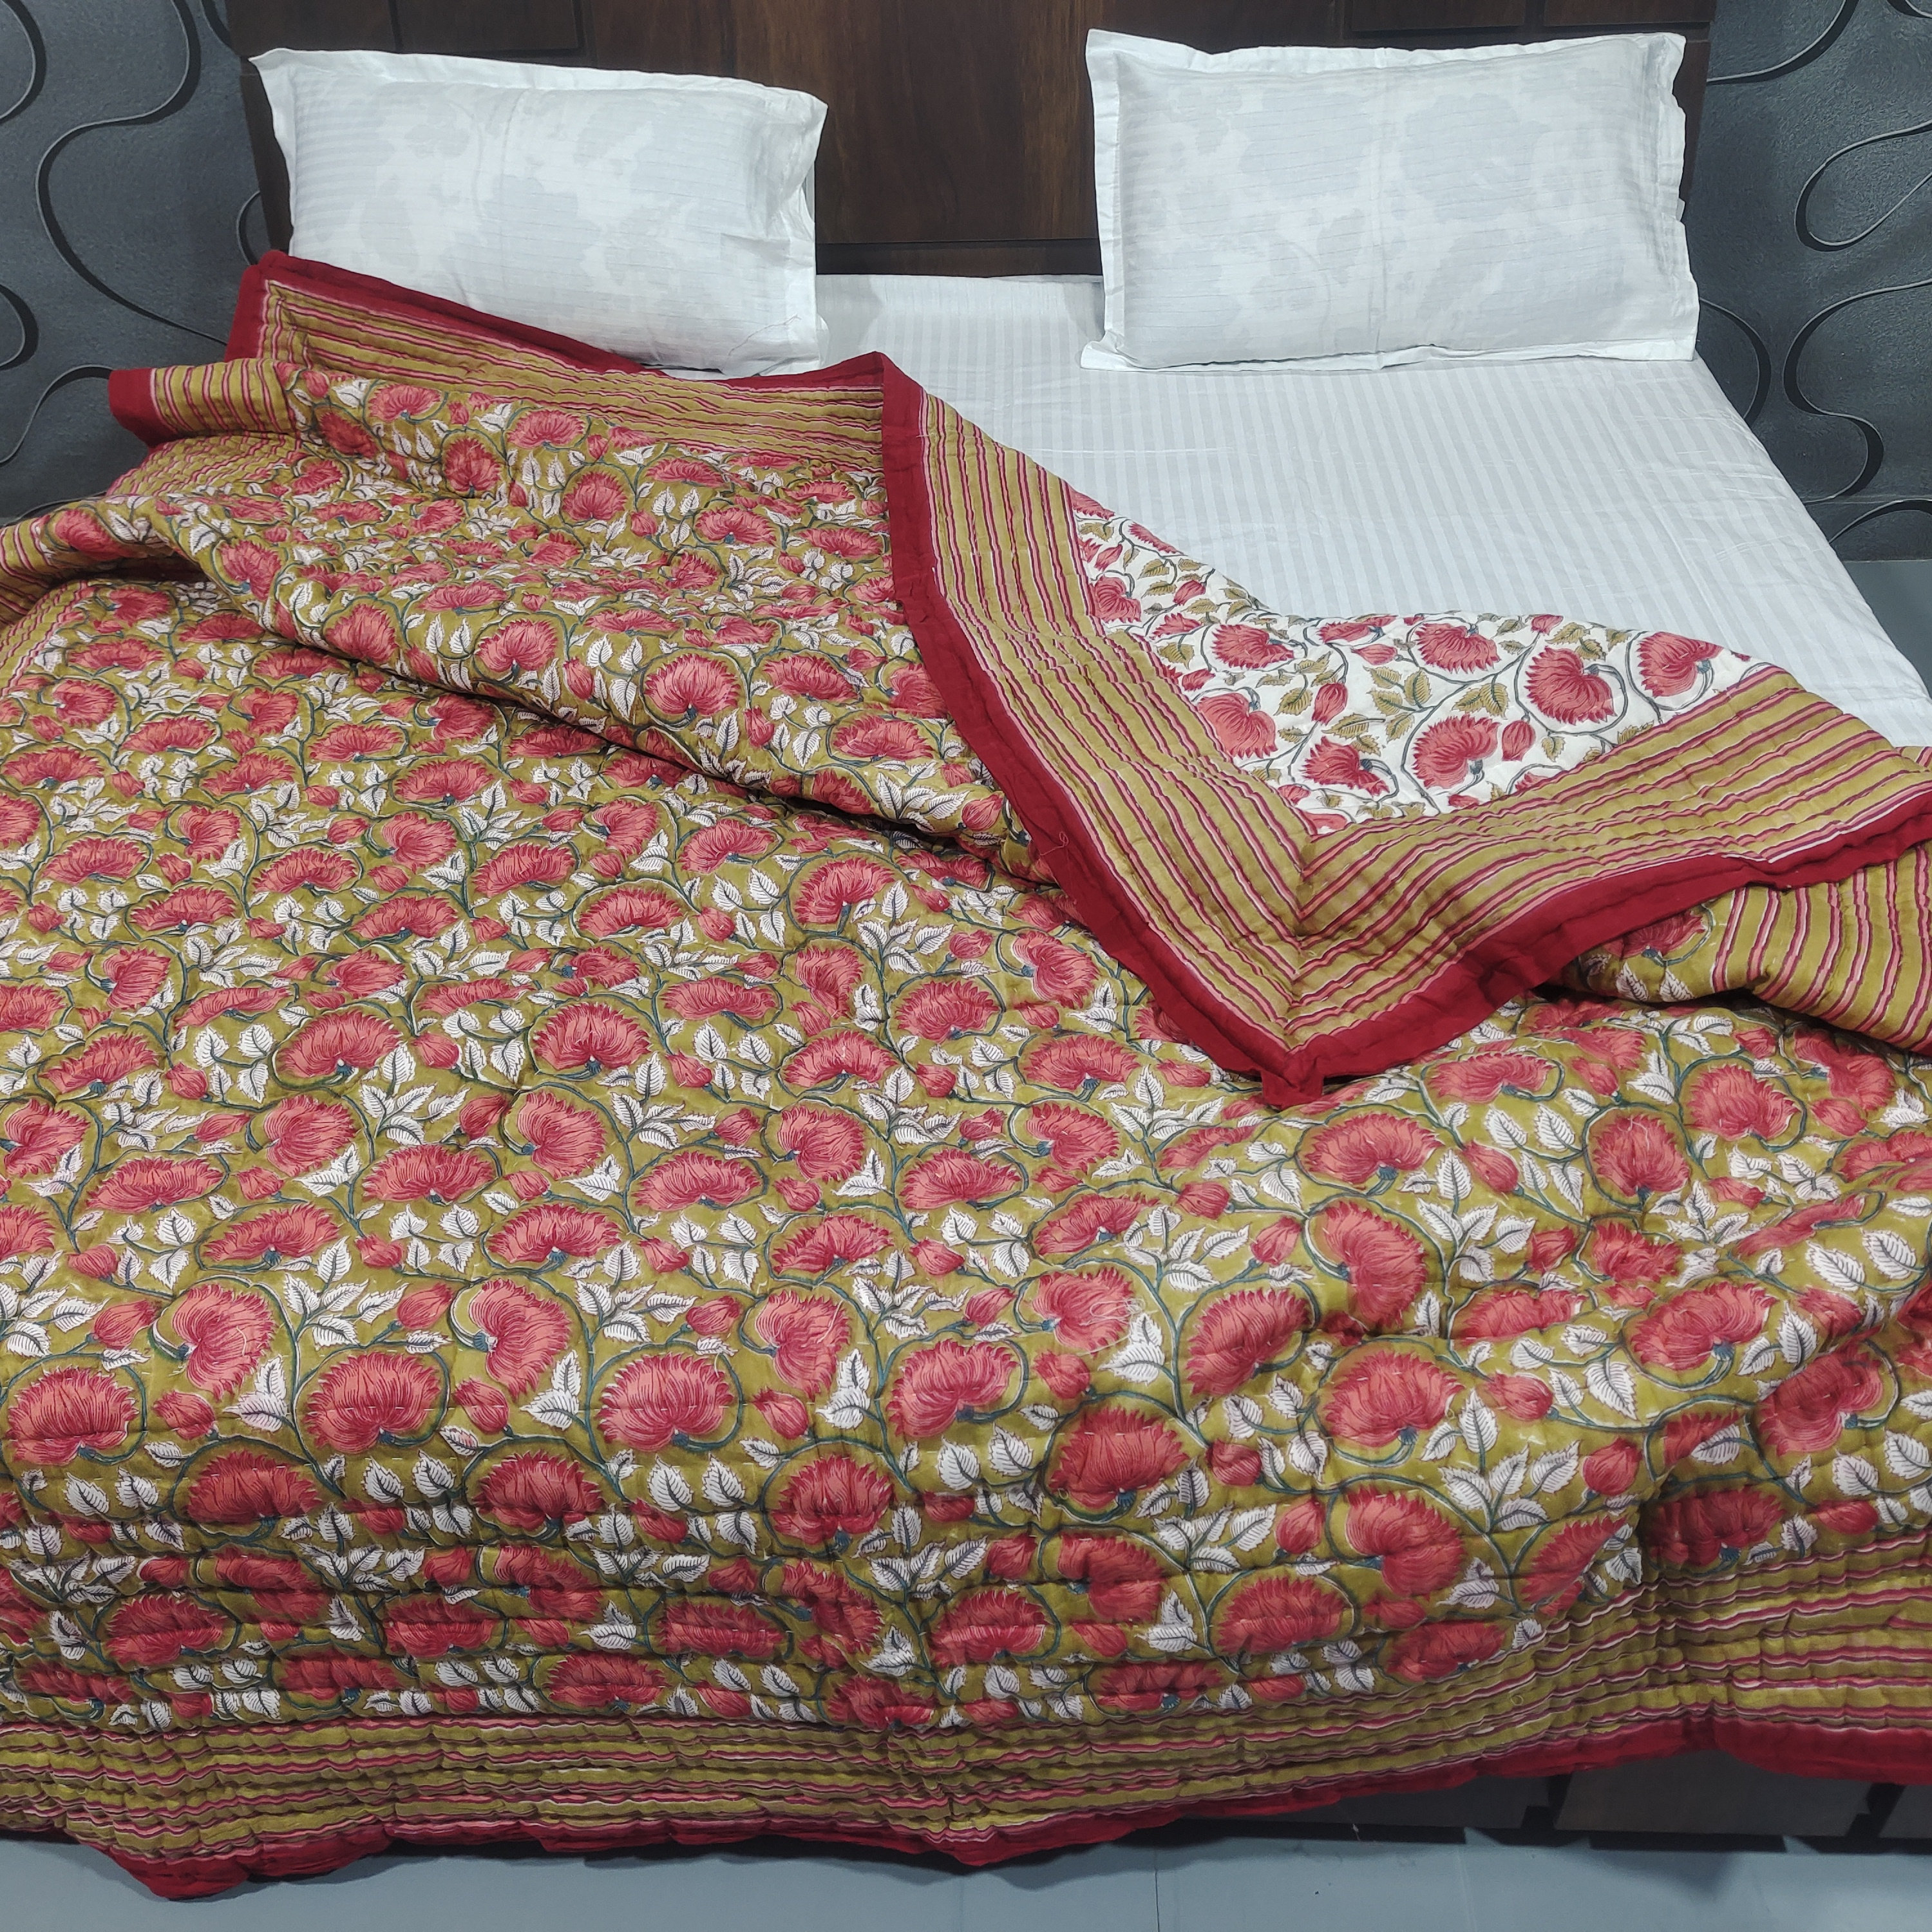 Red Floral Hand Block Print Quilt, Cotton Reversible Kantha Hand